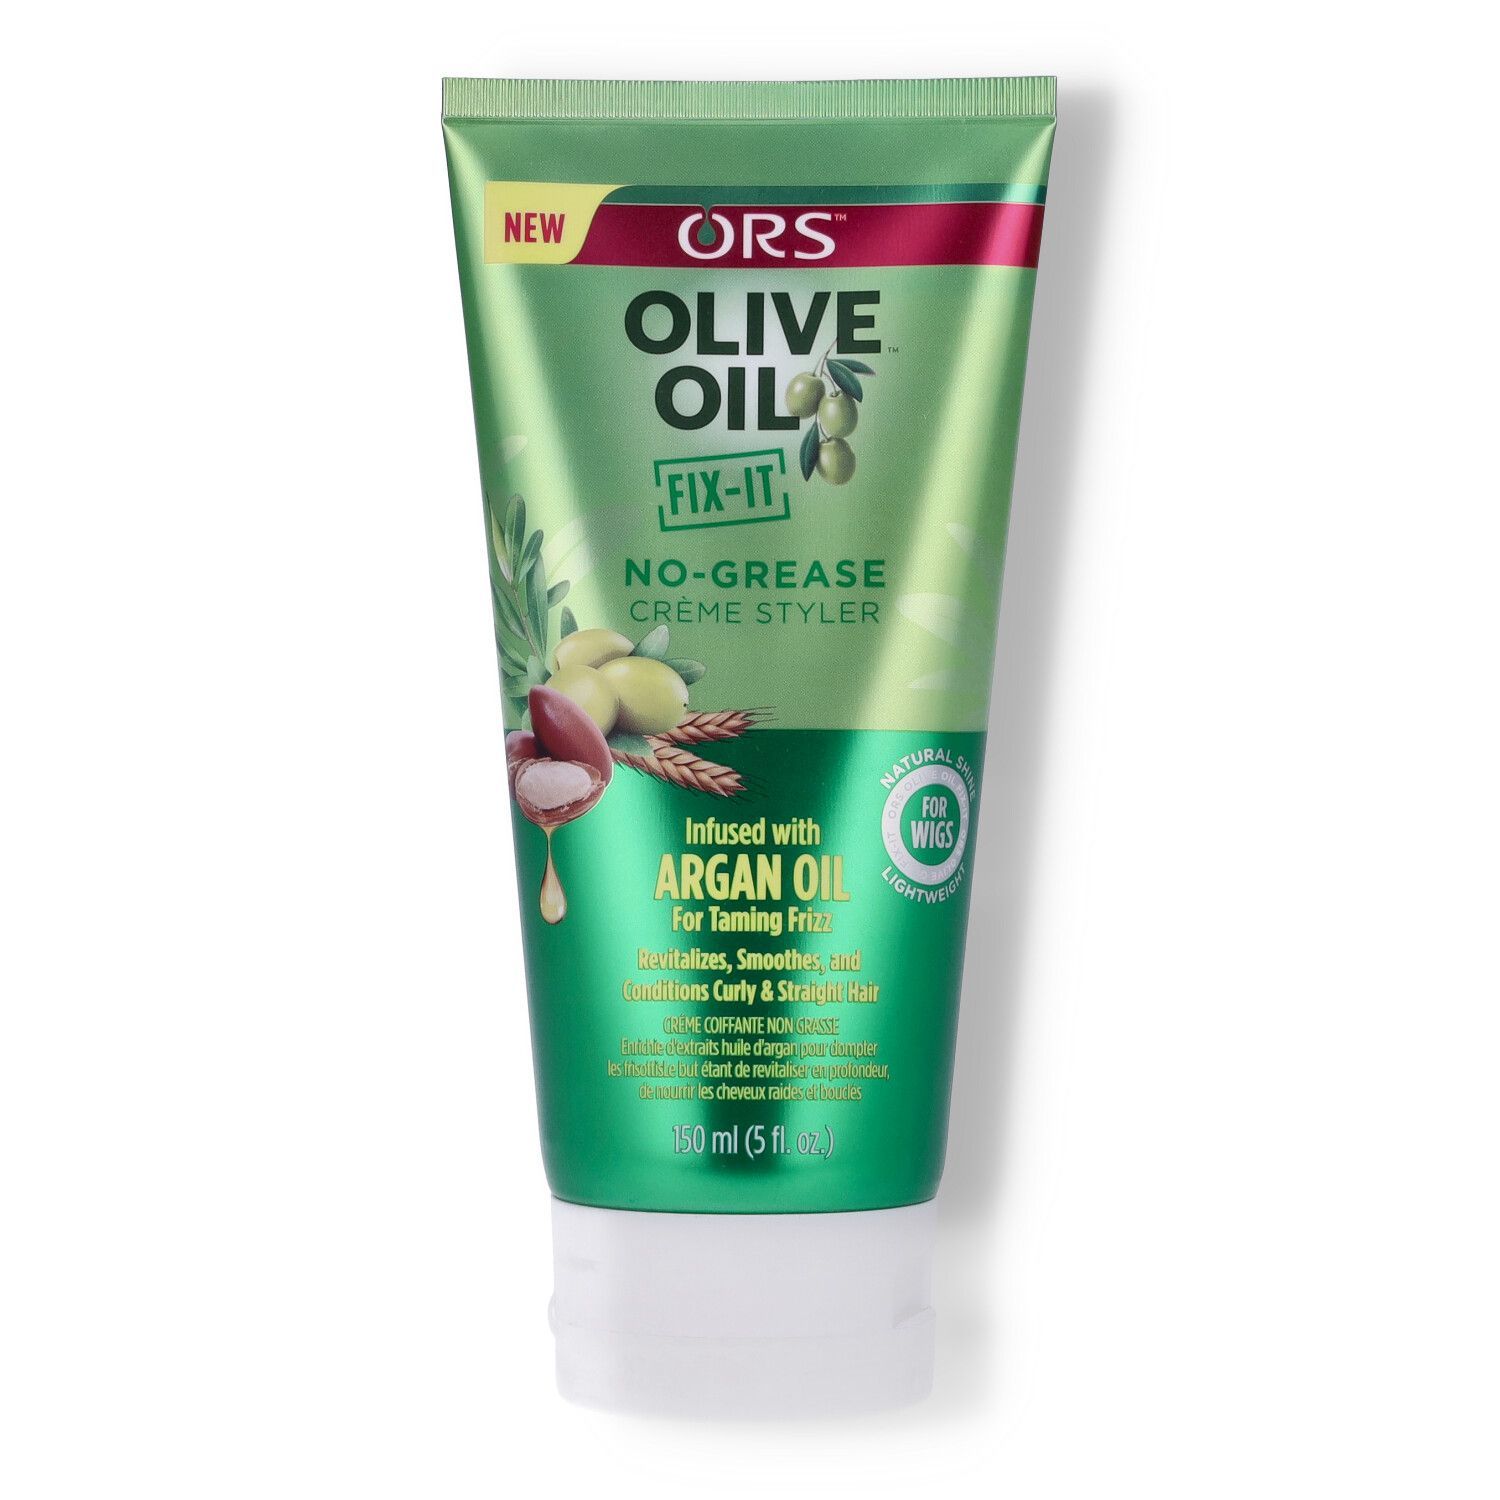 ORS Olive Oil Fix It No Grease Creme Styler - 5oz